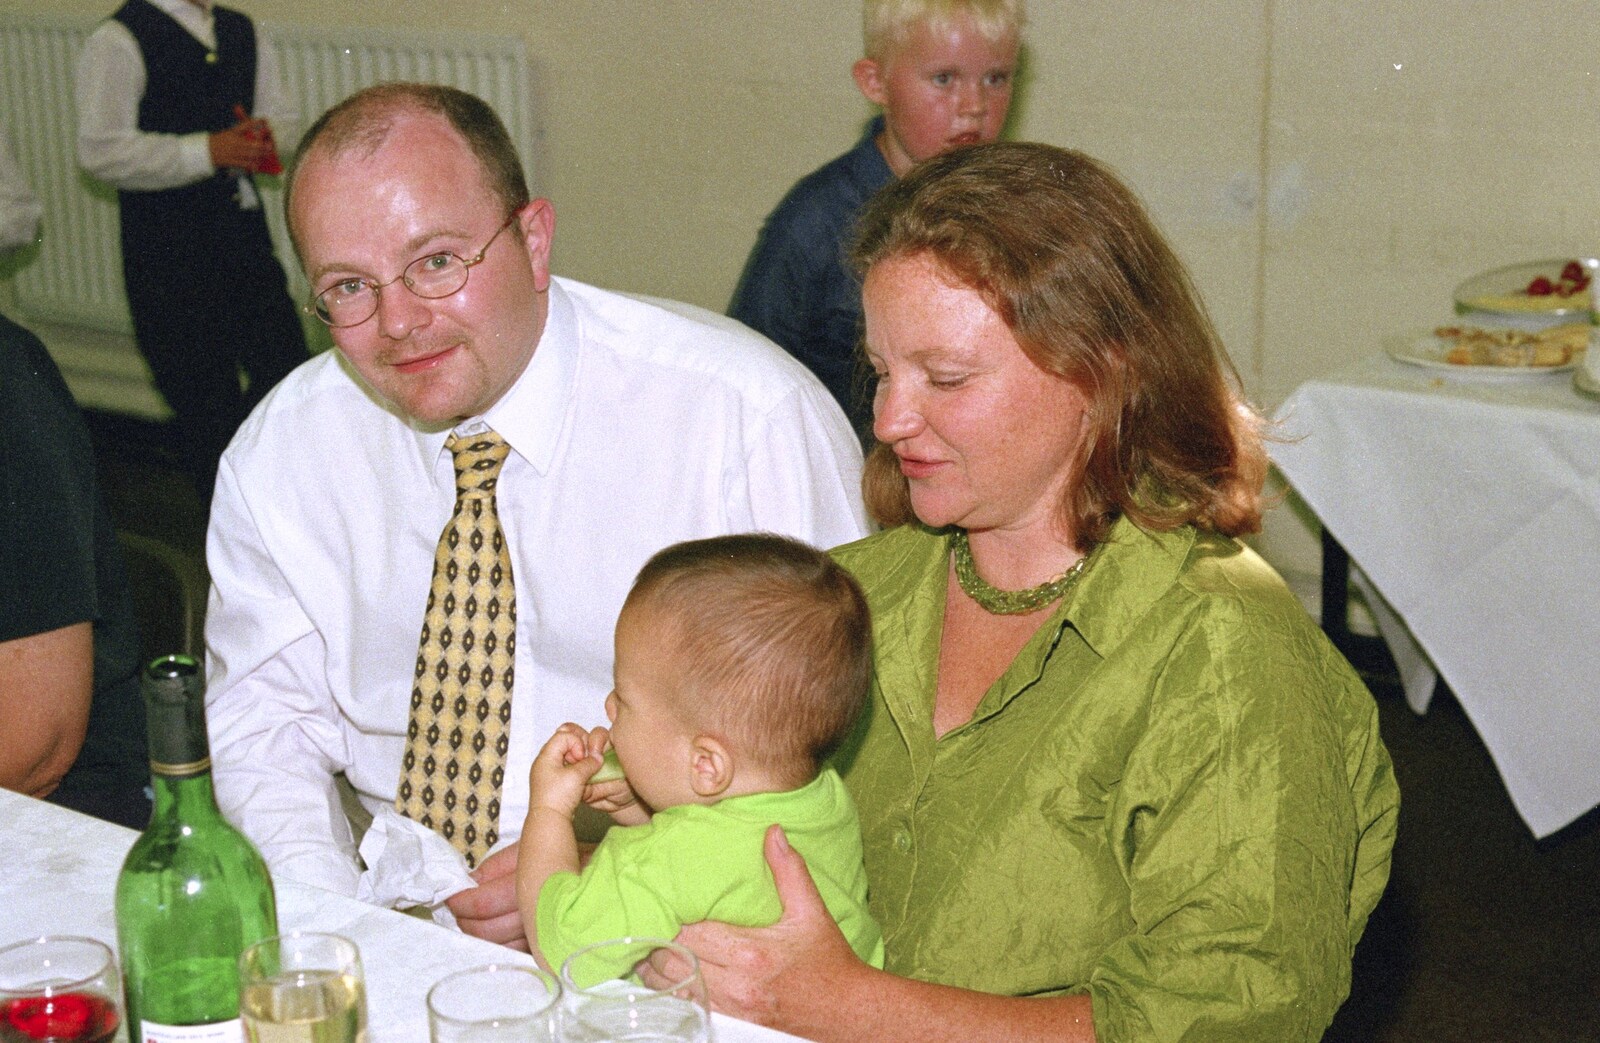 Hamish and Lolly from Sean and Michelle's Wedding, Bashley FC, New Milton - 12th August 2000